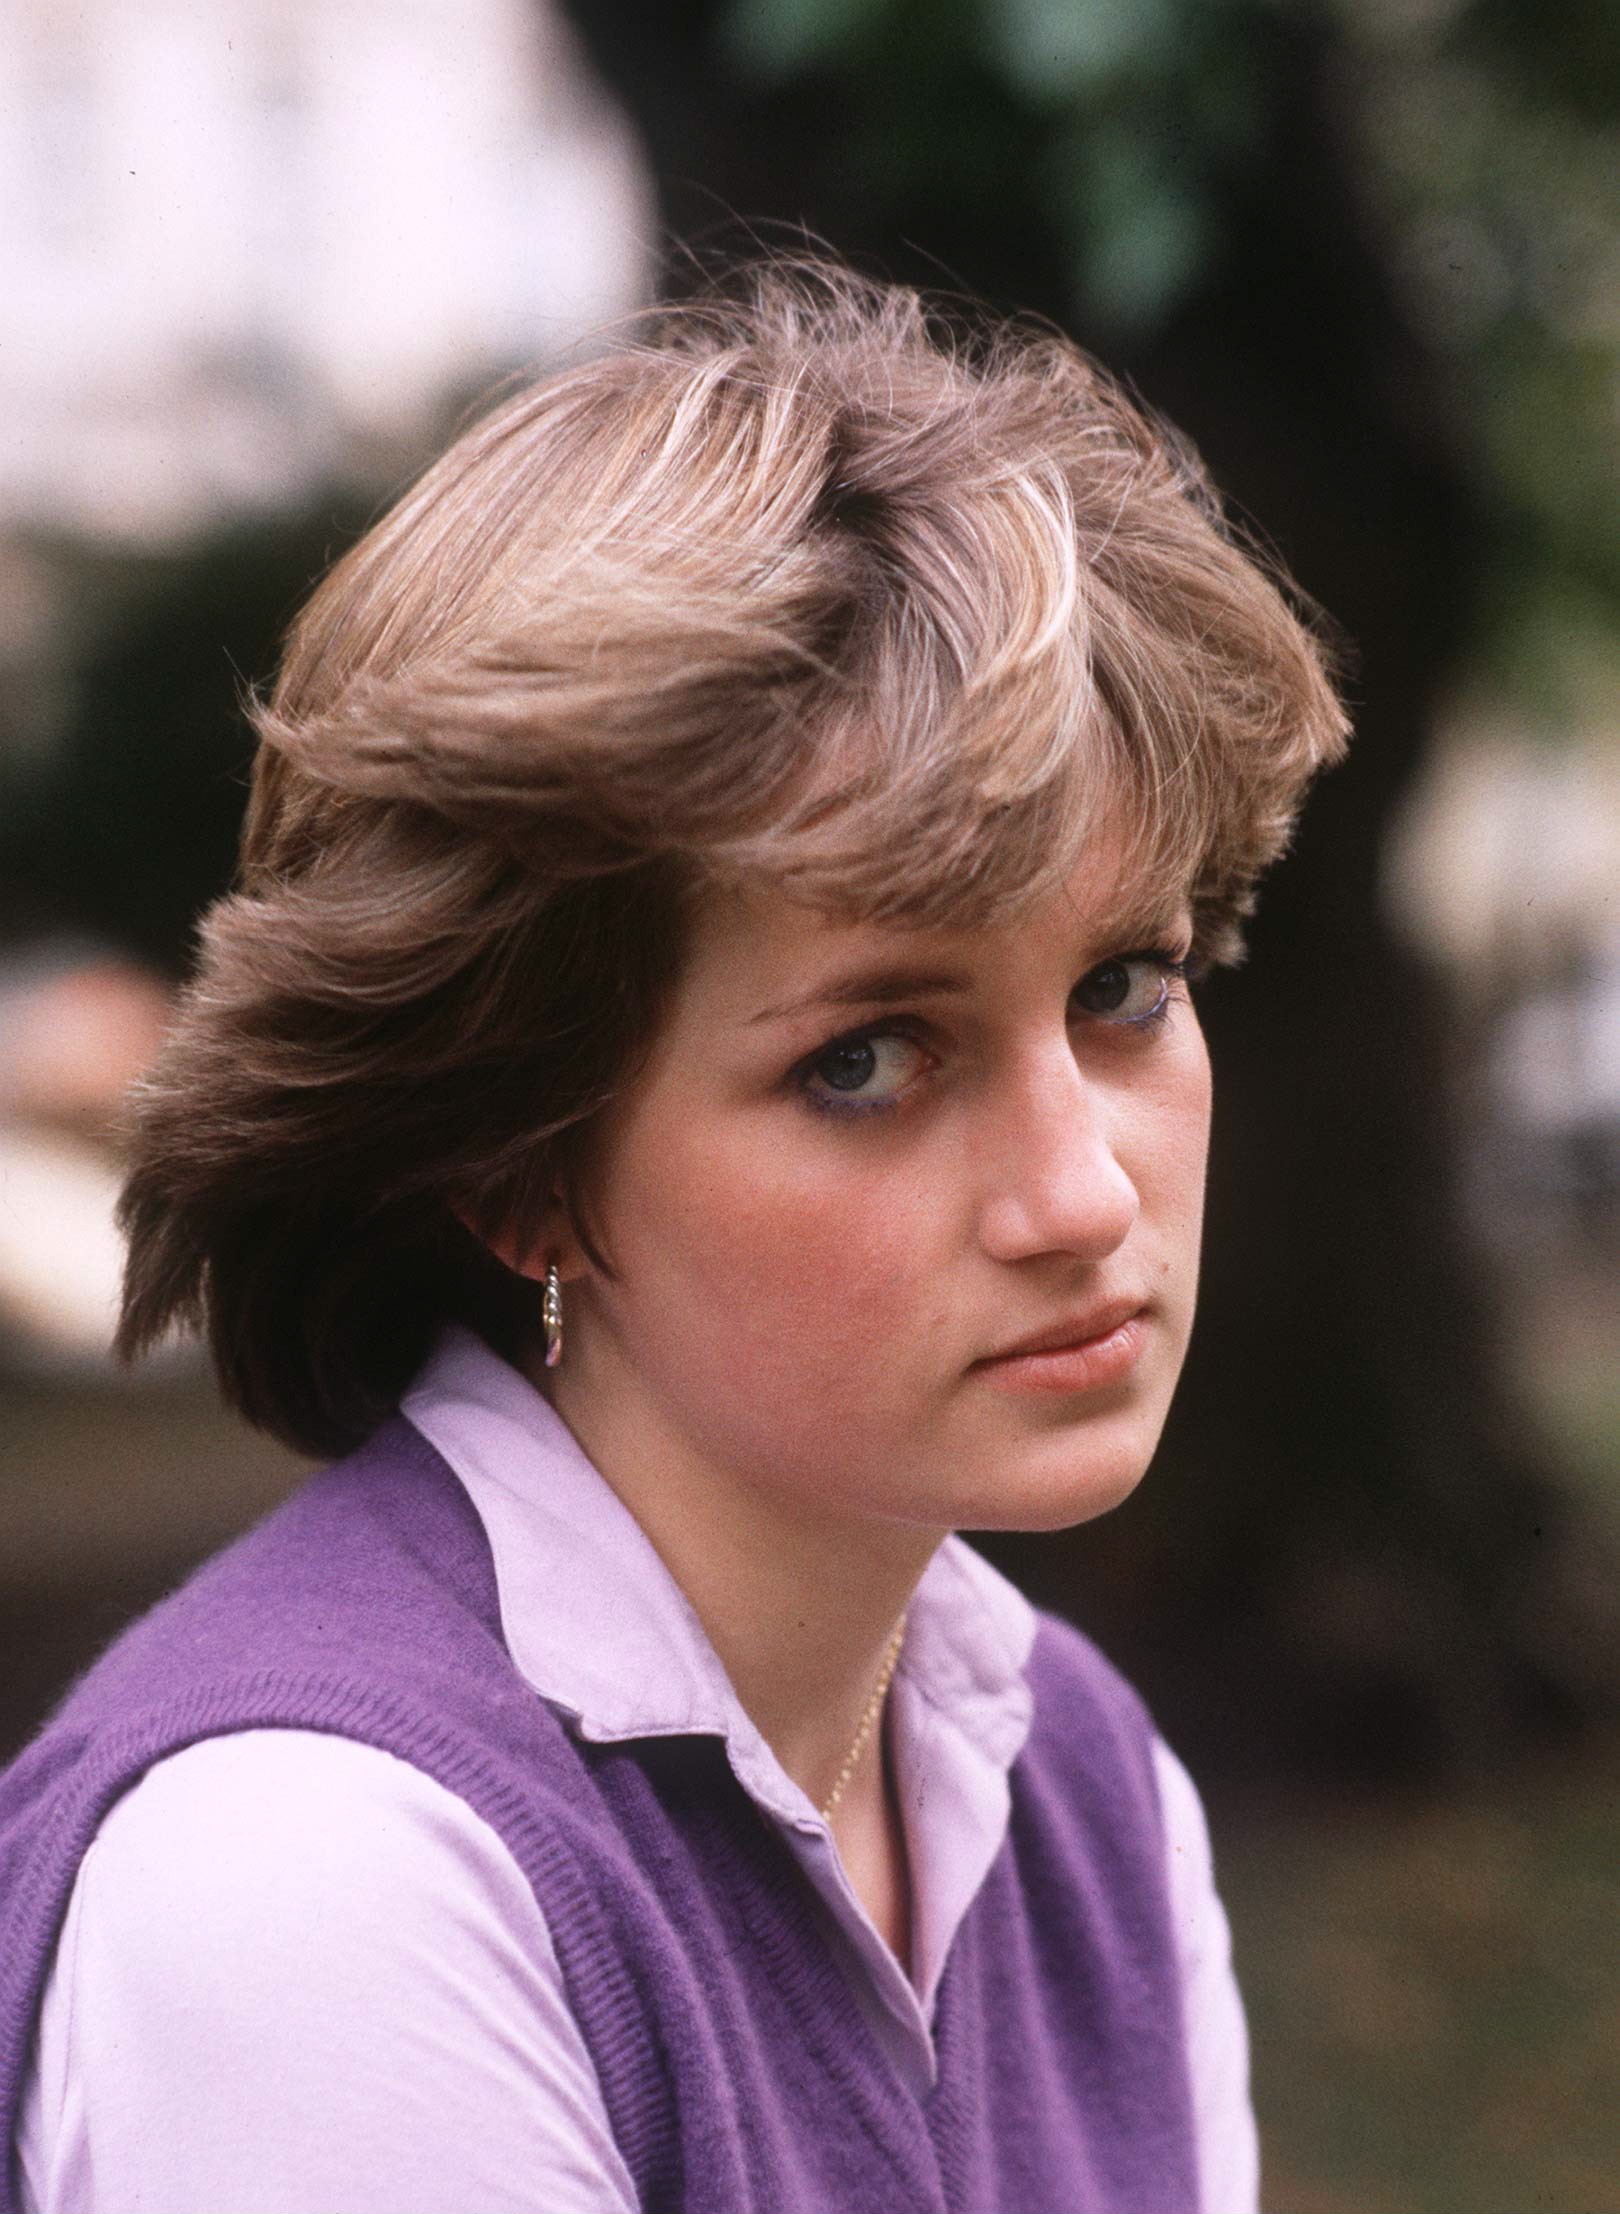 Lady Diana Spencer pictured at The Young England Kindergarten Nursery School on September 17, 1980 in Pimlico, London. | Source: Getty Images